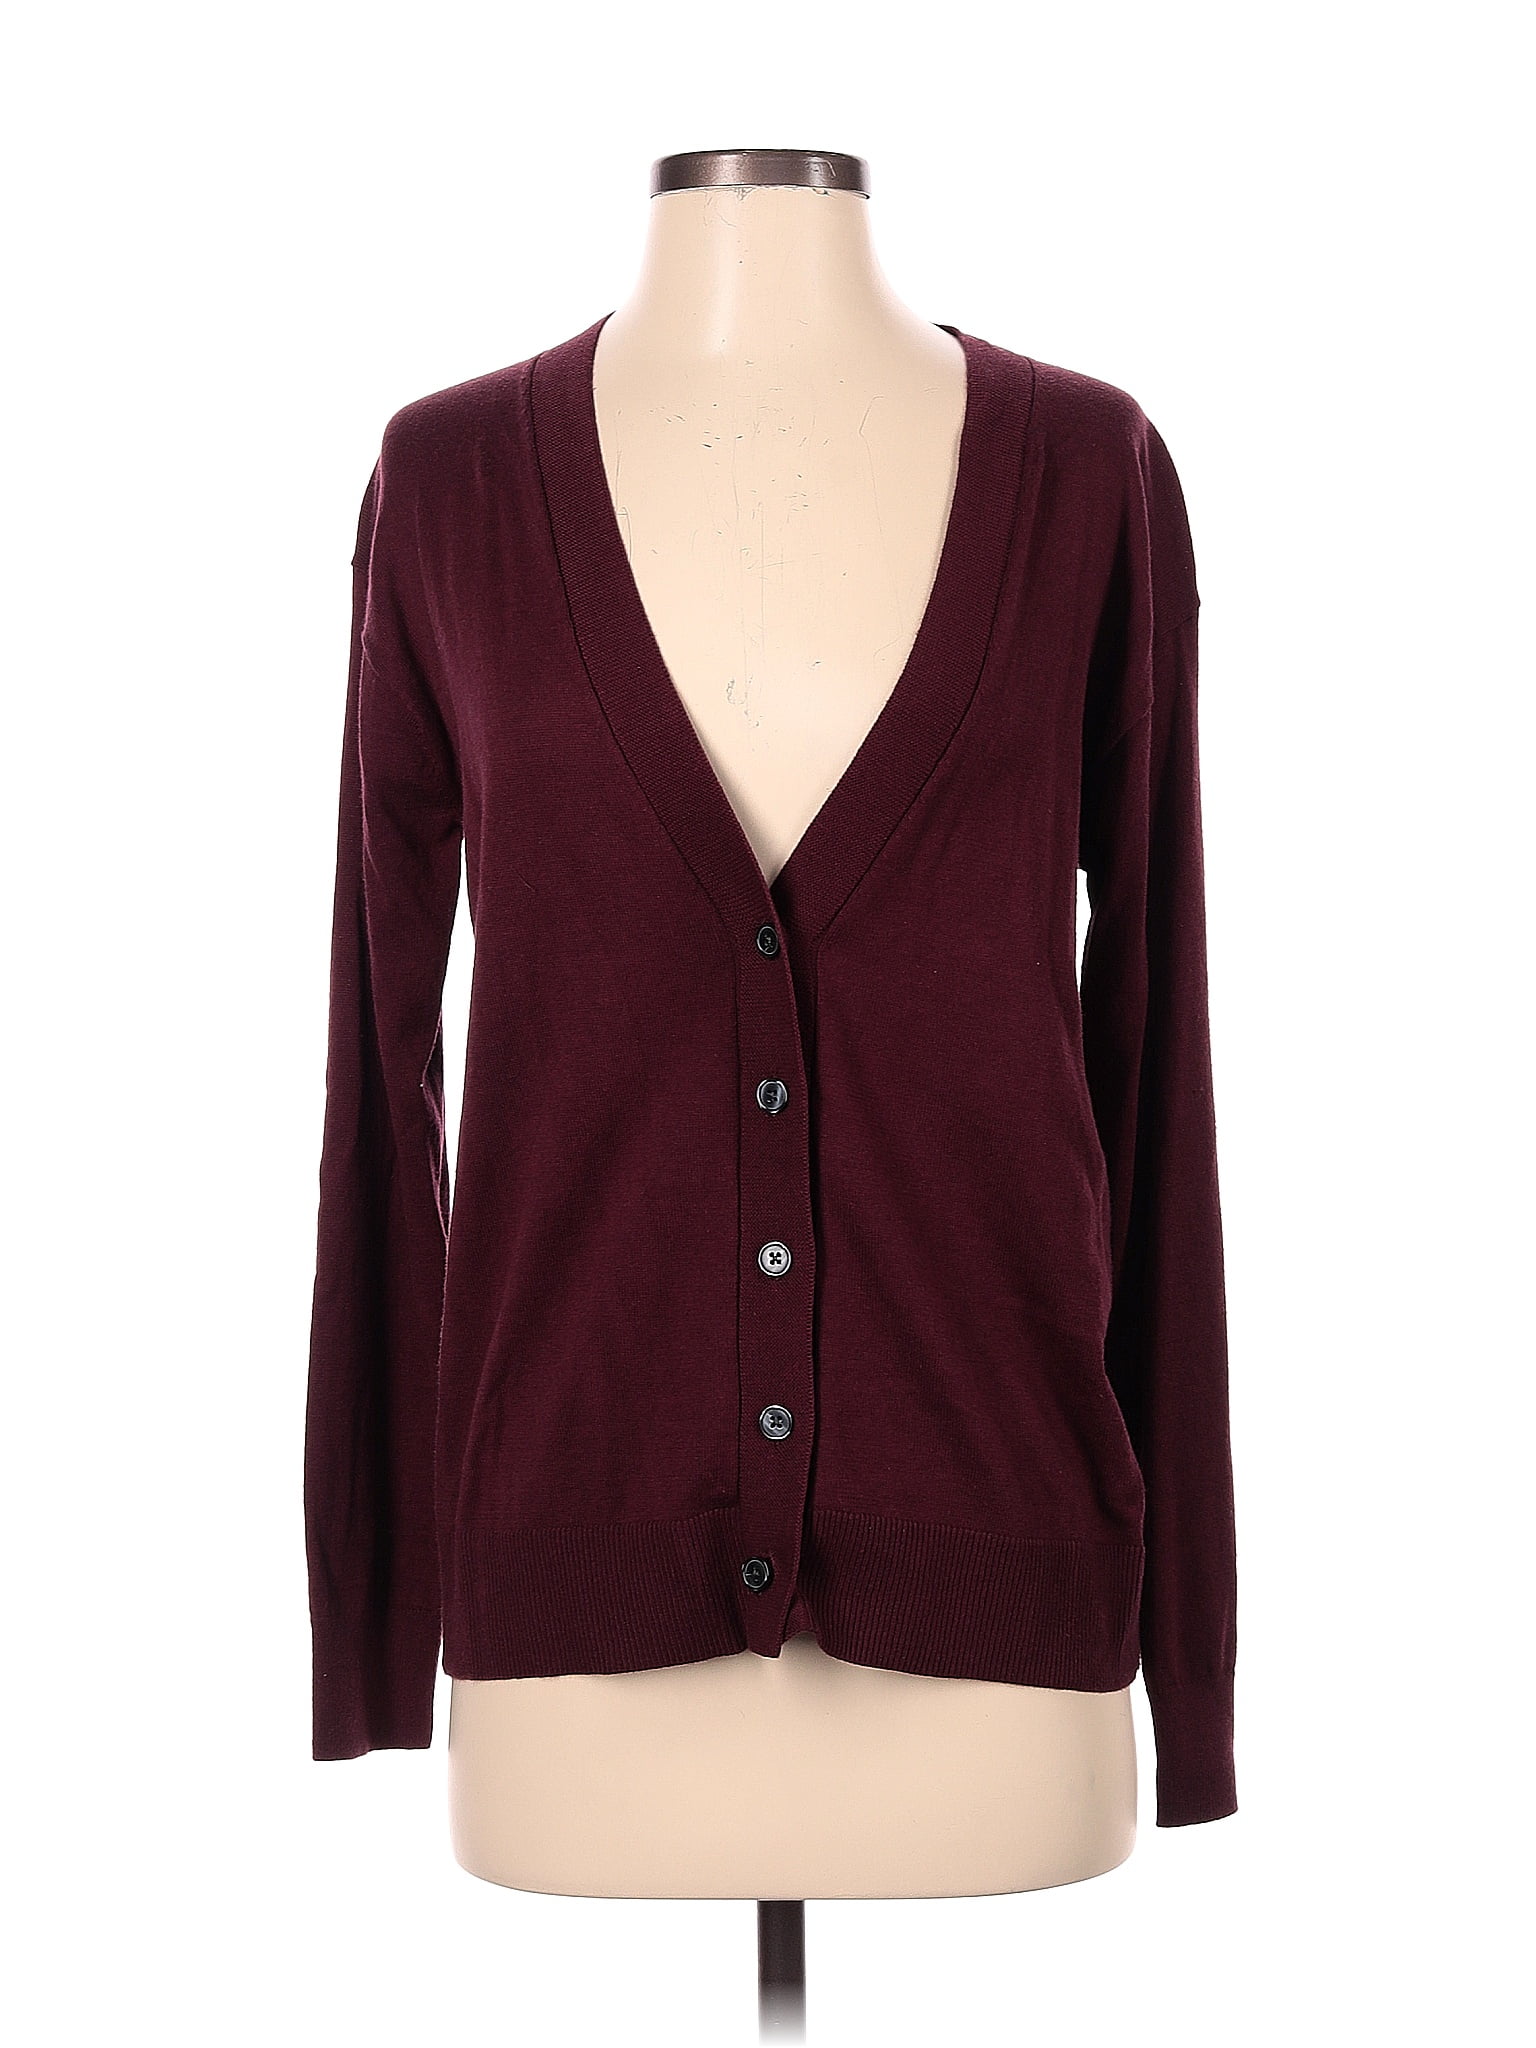 Women's Cardigan Sweaters: New & Used On Sale Up To 90% Off | ThredUp